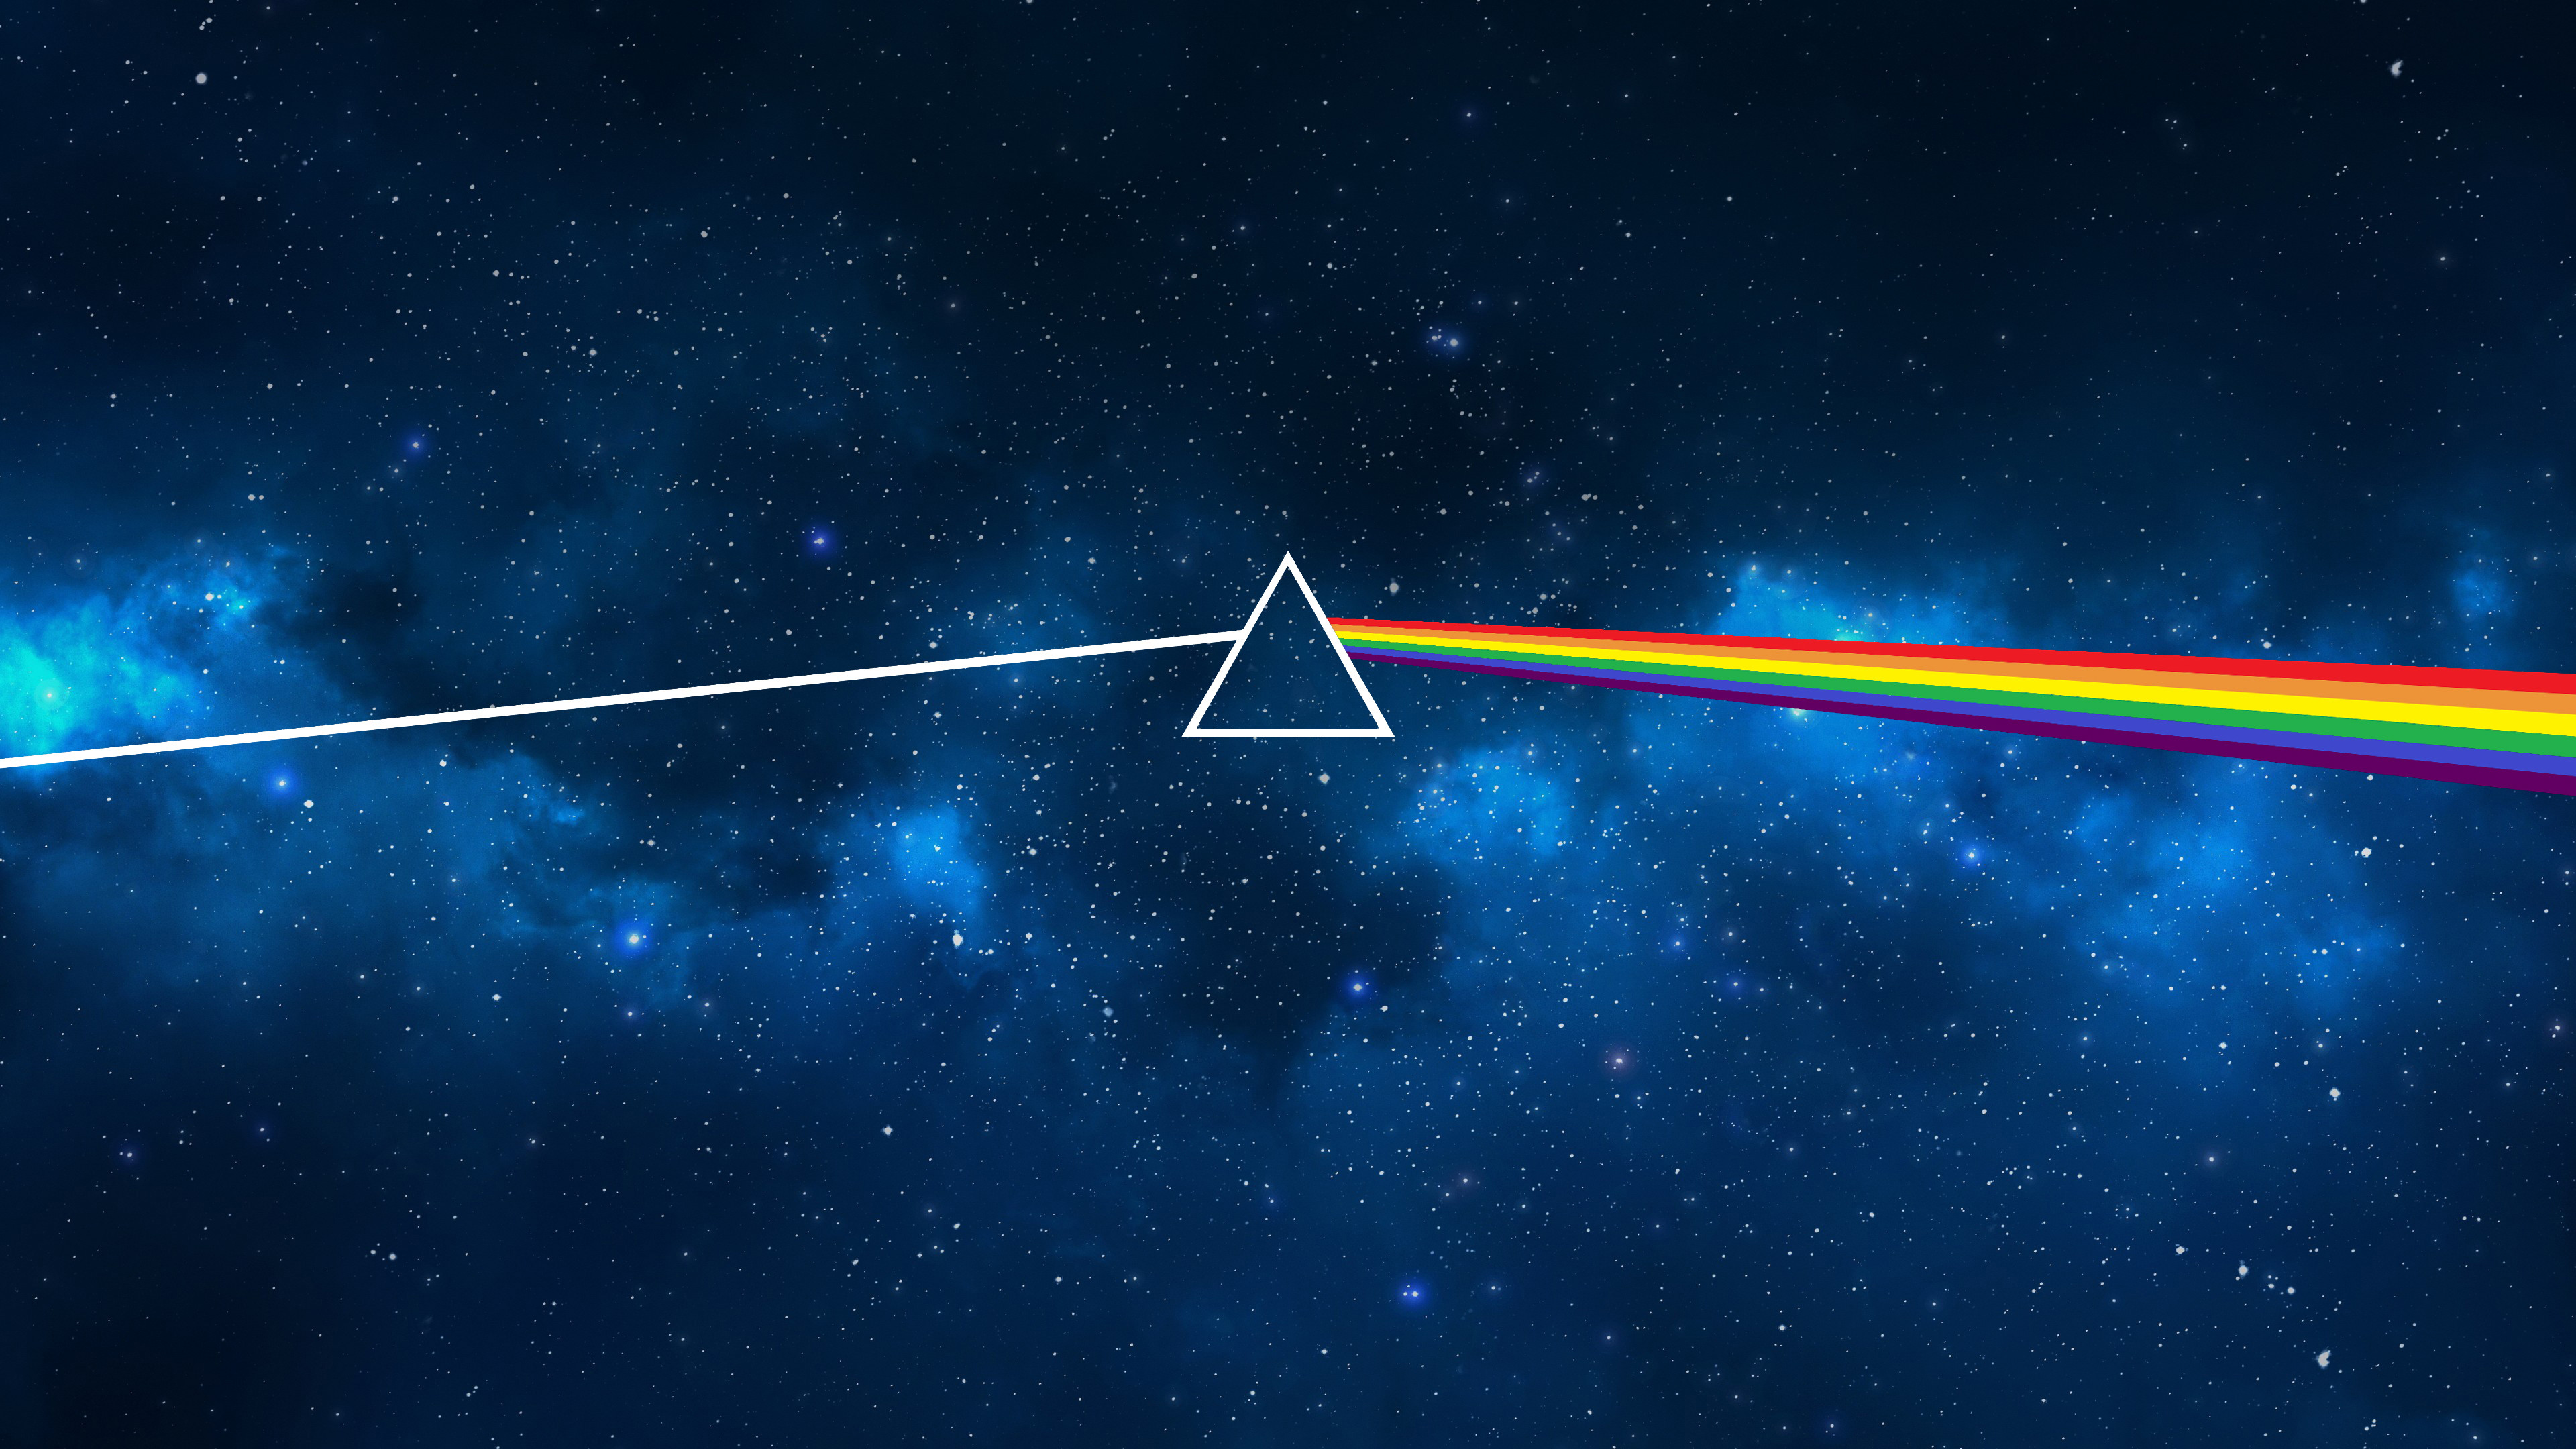 Dark Side of the Moon Wallpaper 68 images